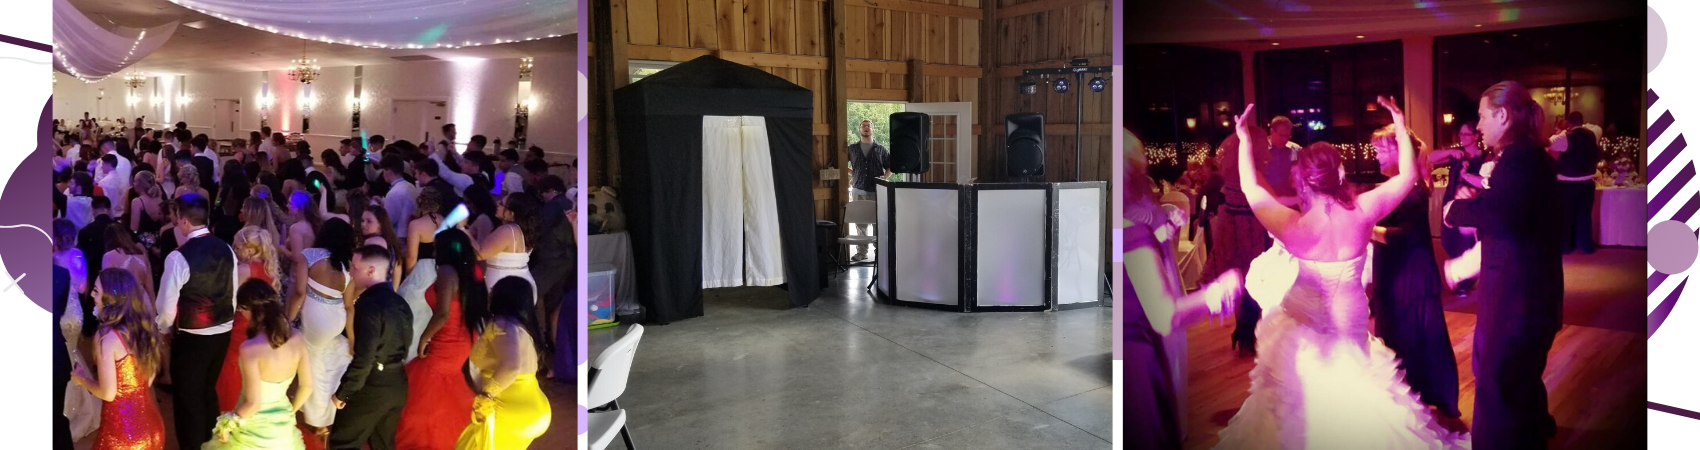 Prom Guests Dancing, Photo Booth, Bride and Groom Dancing